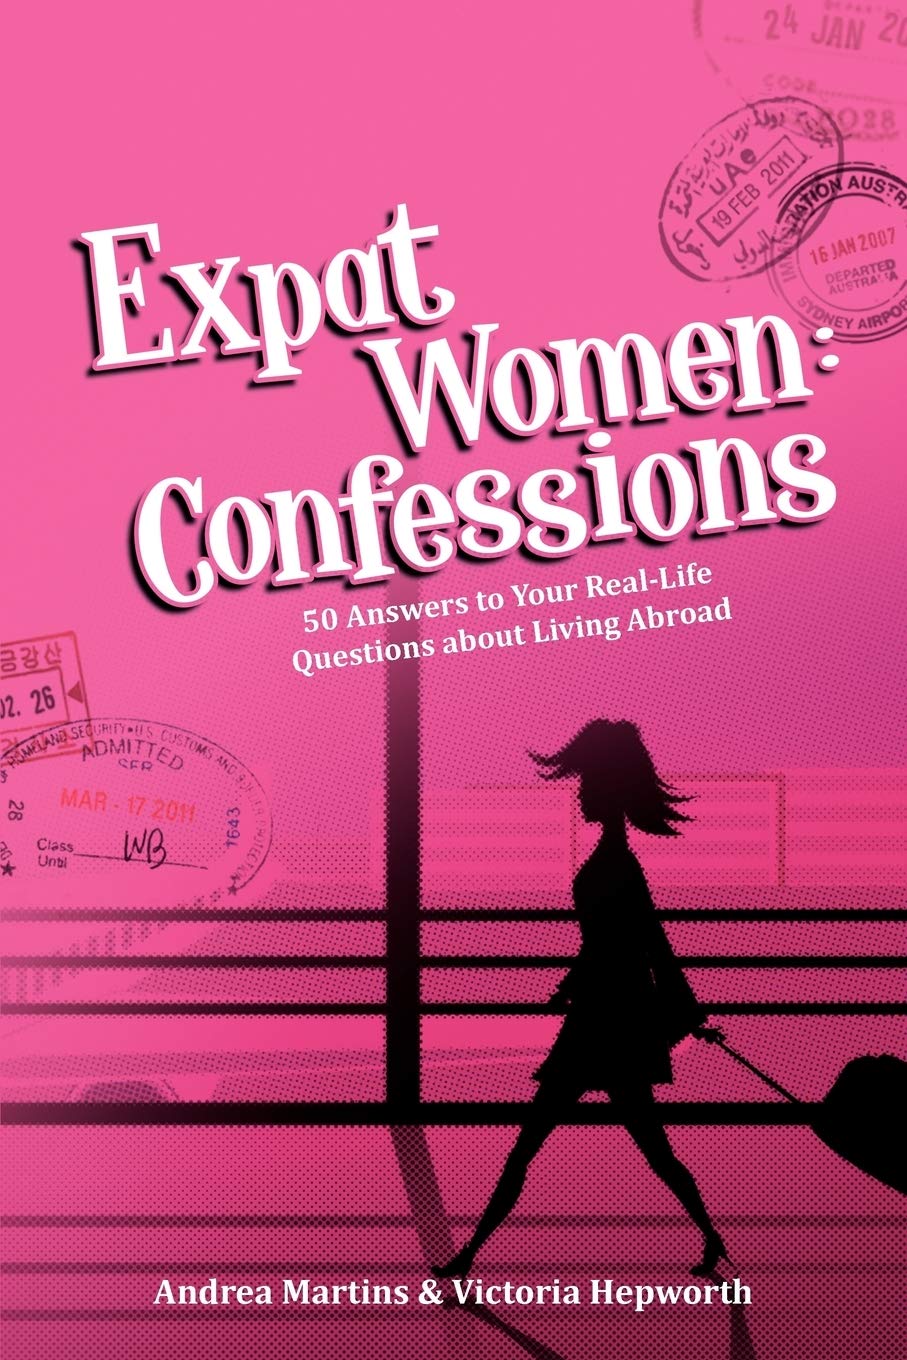 Expat Women: Confessions - 50 Answers to Your Real-Life Questions about Living Abroad - Amazon